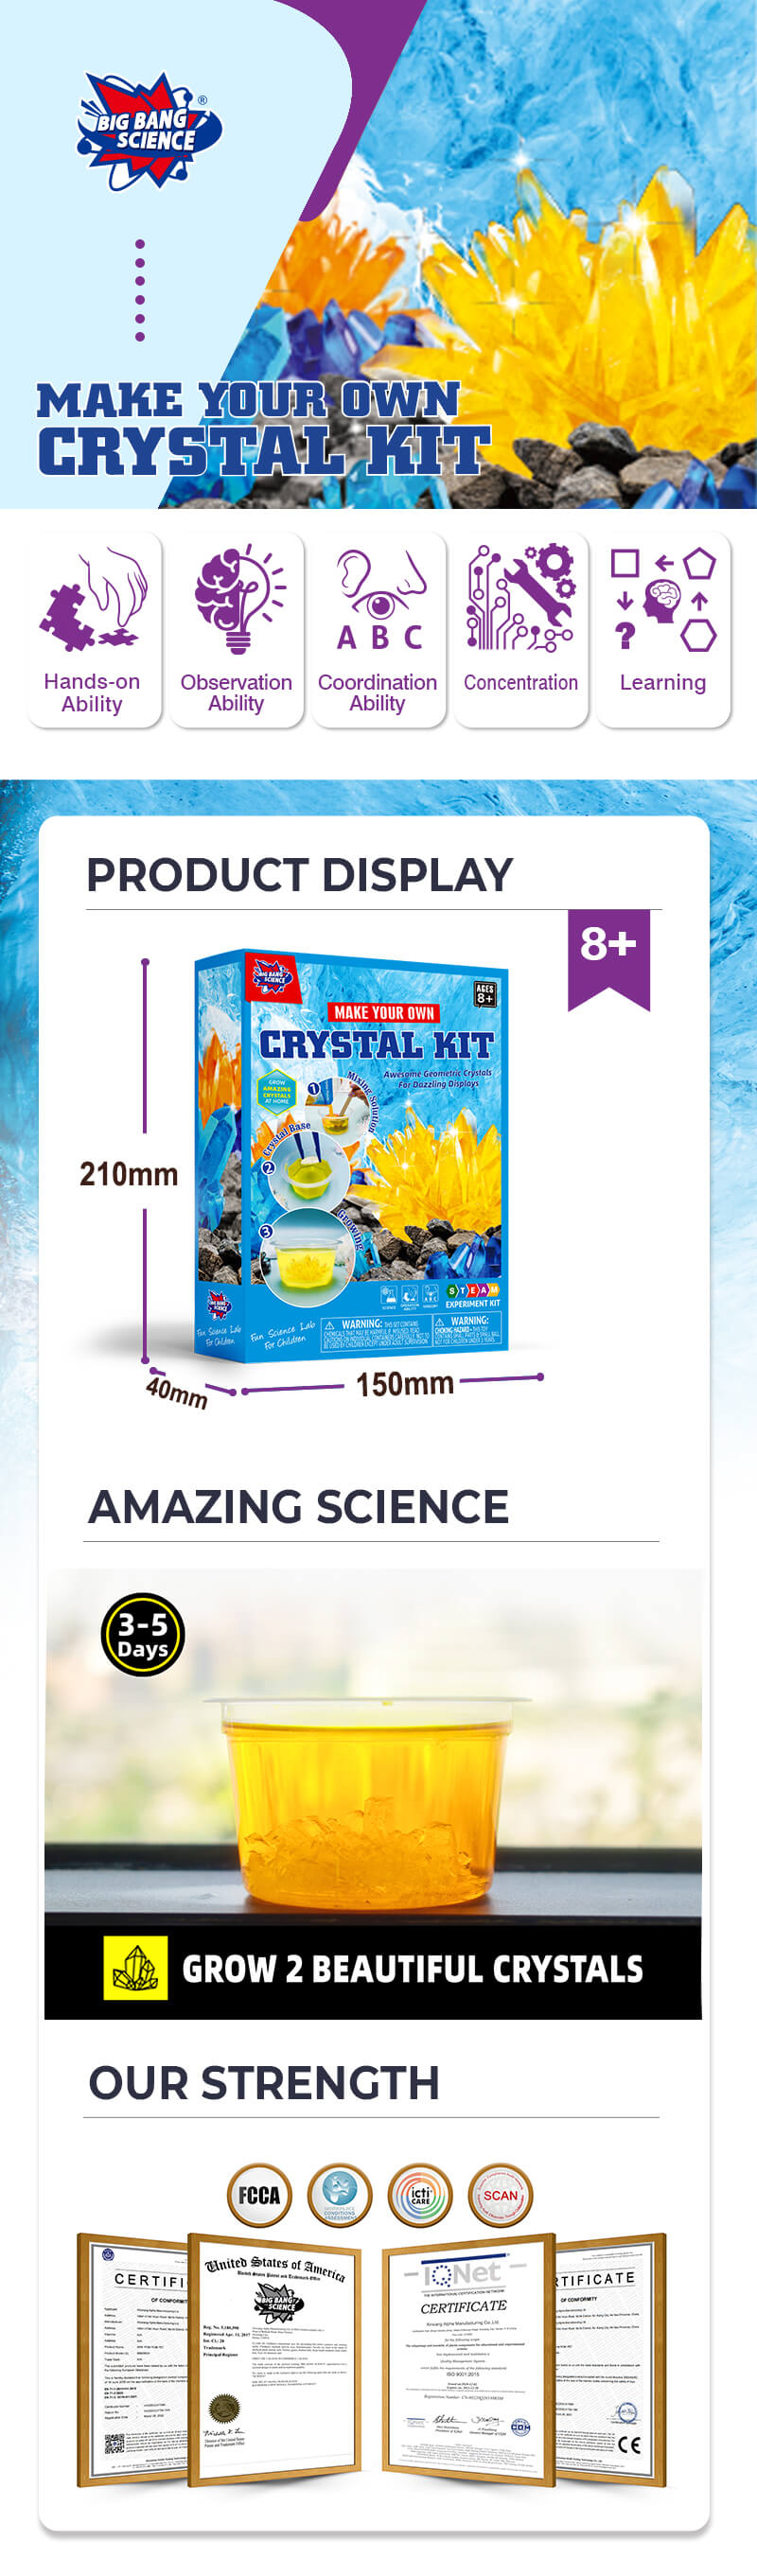 Make-You-Rown-Crystal-Kit-Product-details-chart